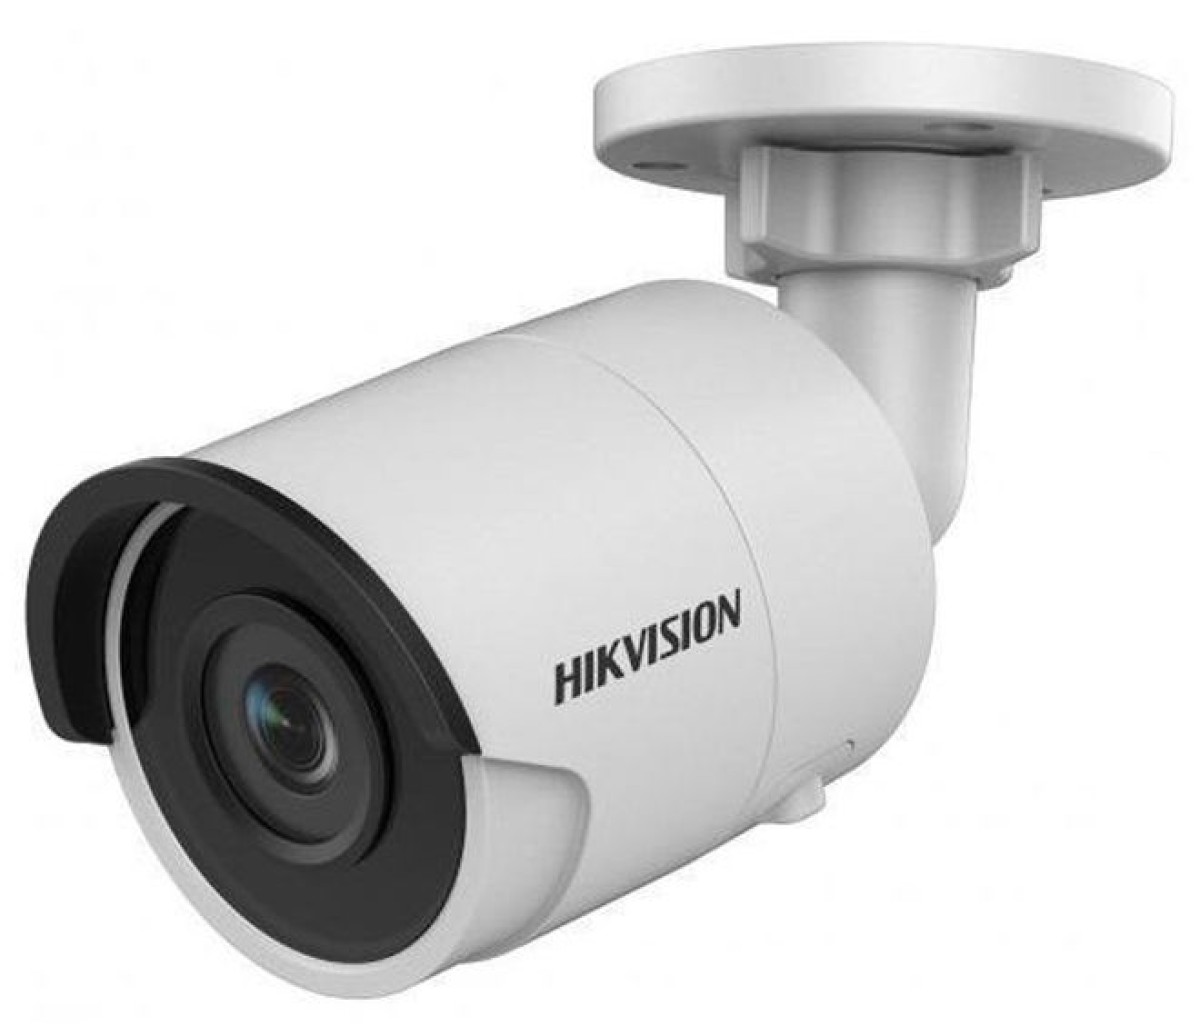 IP-камера Hikvision DS-2CD2035FWD-I (4.0) 98_85.jpg